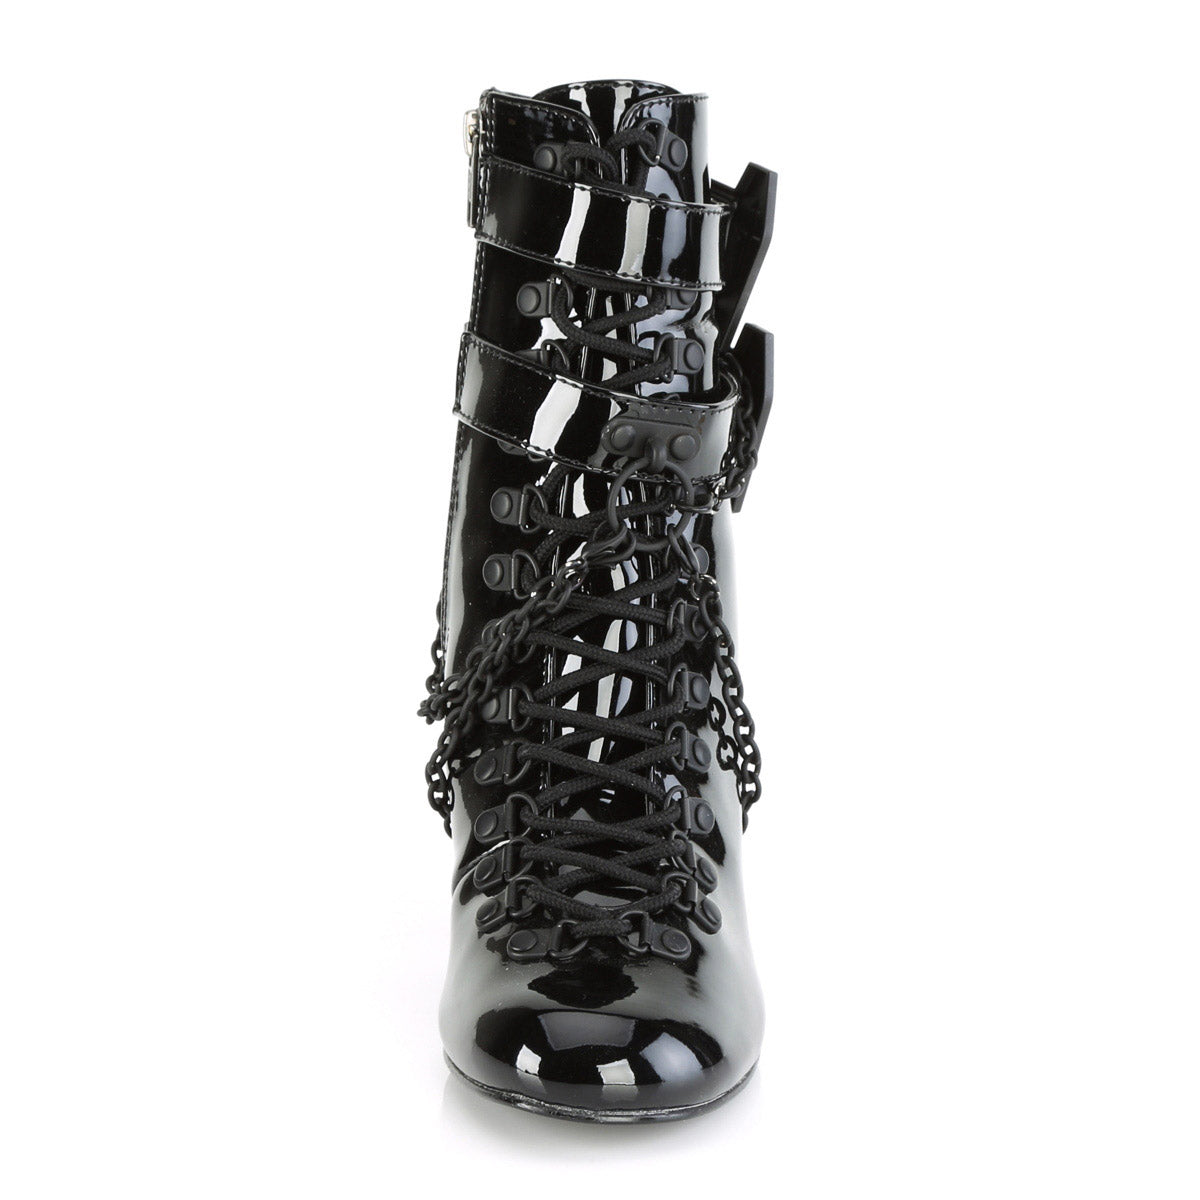 3" Block Heel Round Toe D-ring Lace-Up Ankle Boot, Size Zip Pleaser Demonia VIVIKA/128